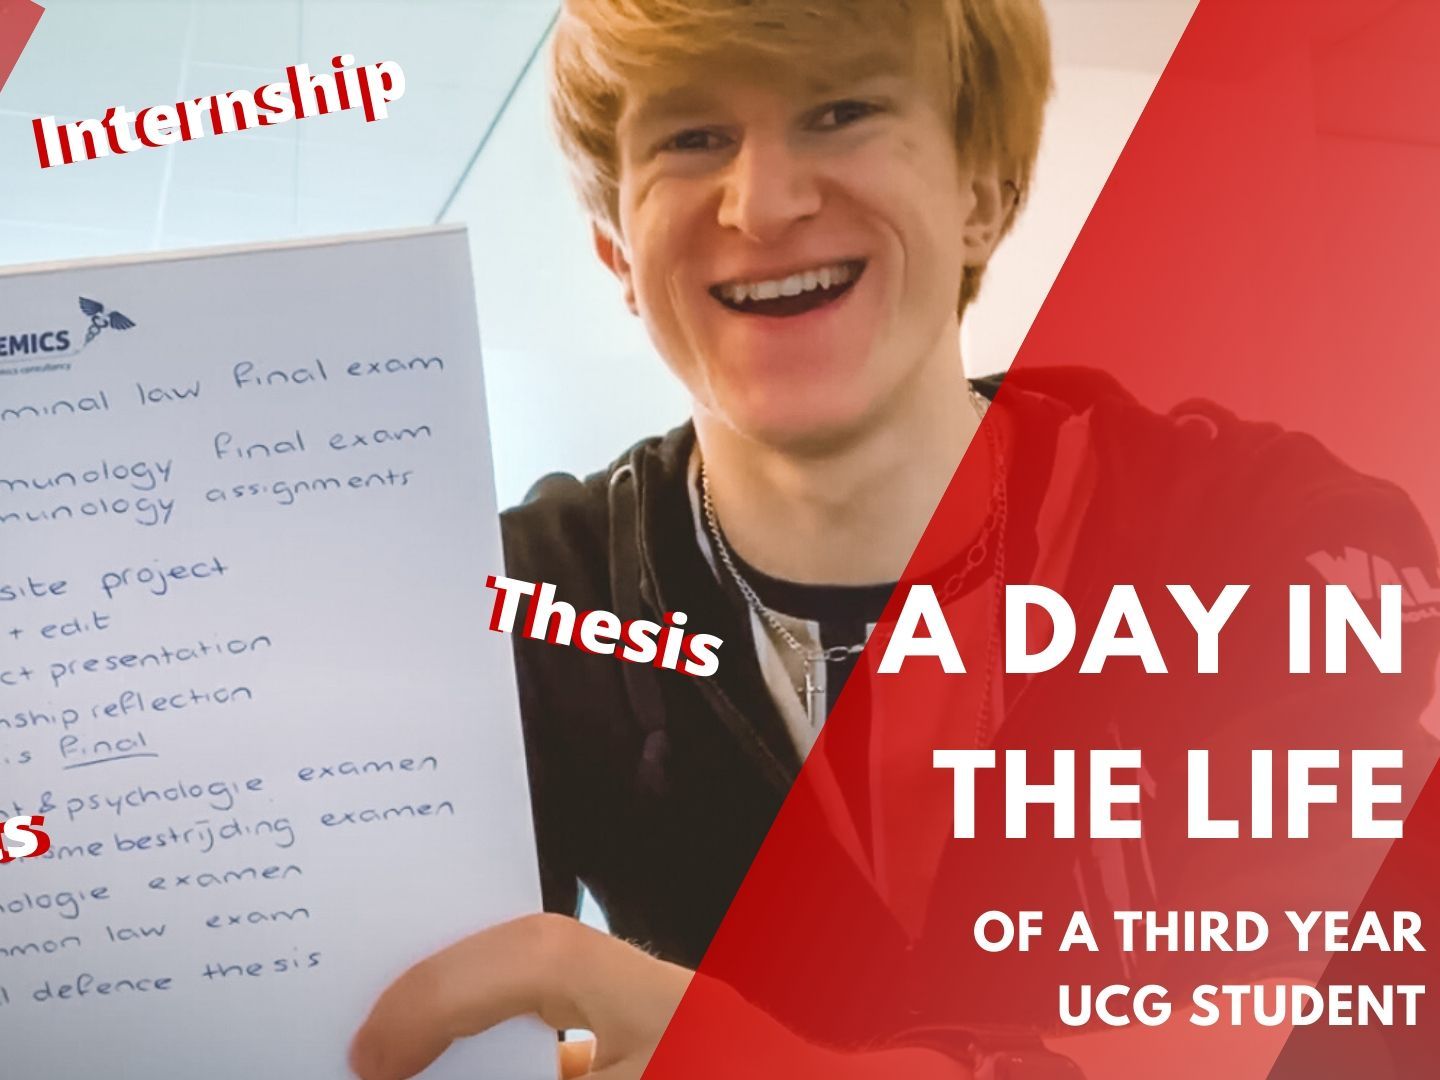 A day in the life of a third year UCG student